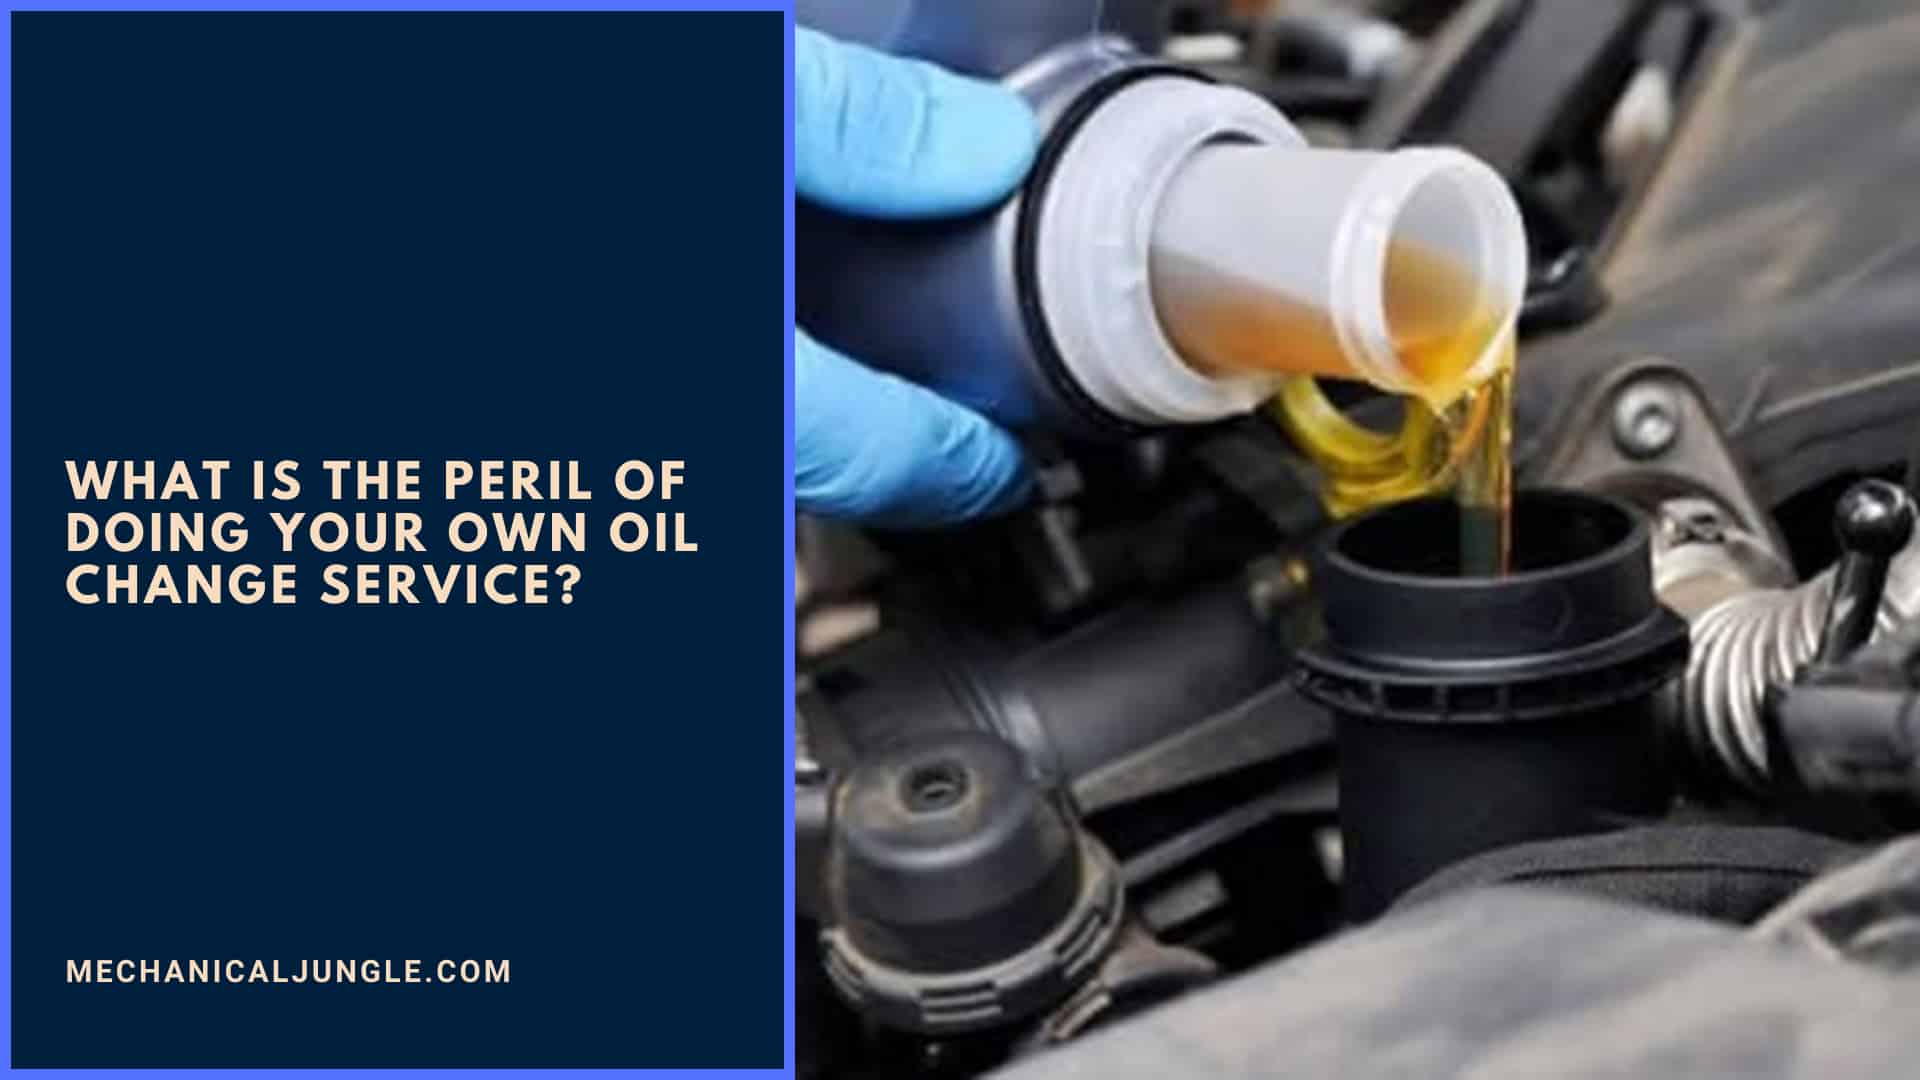 What is the peril of doing your own oil change service?